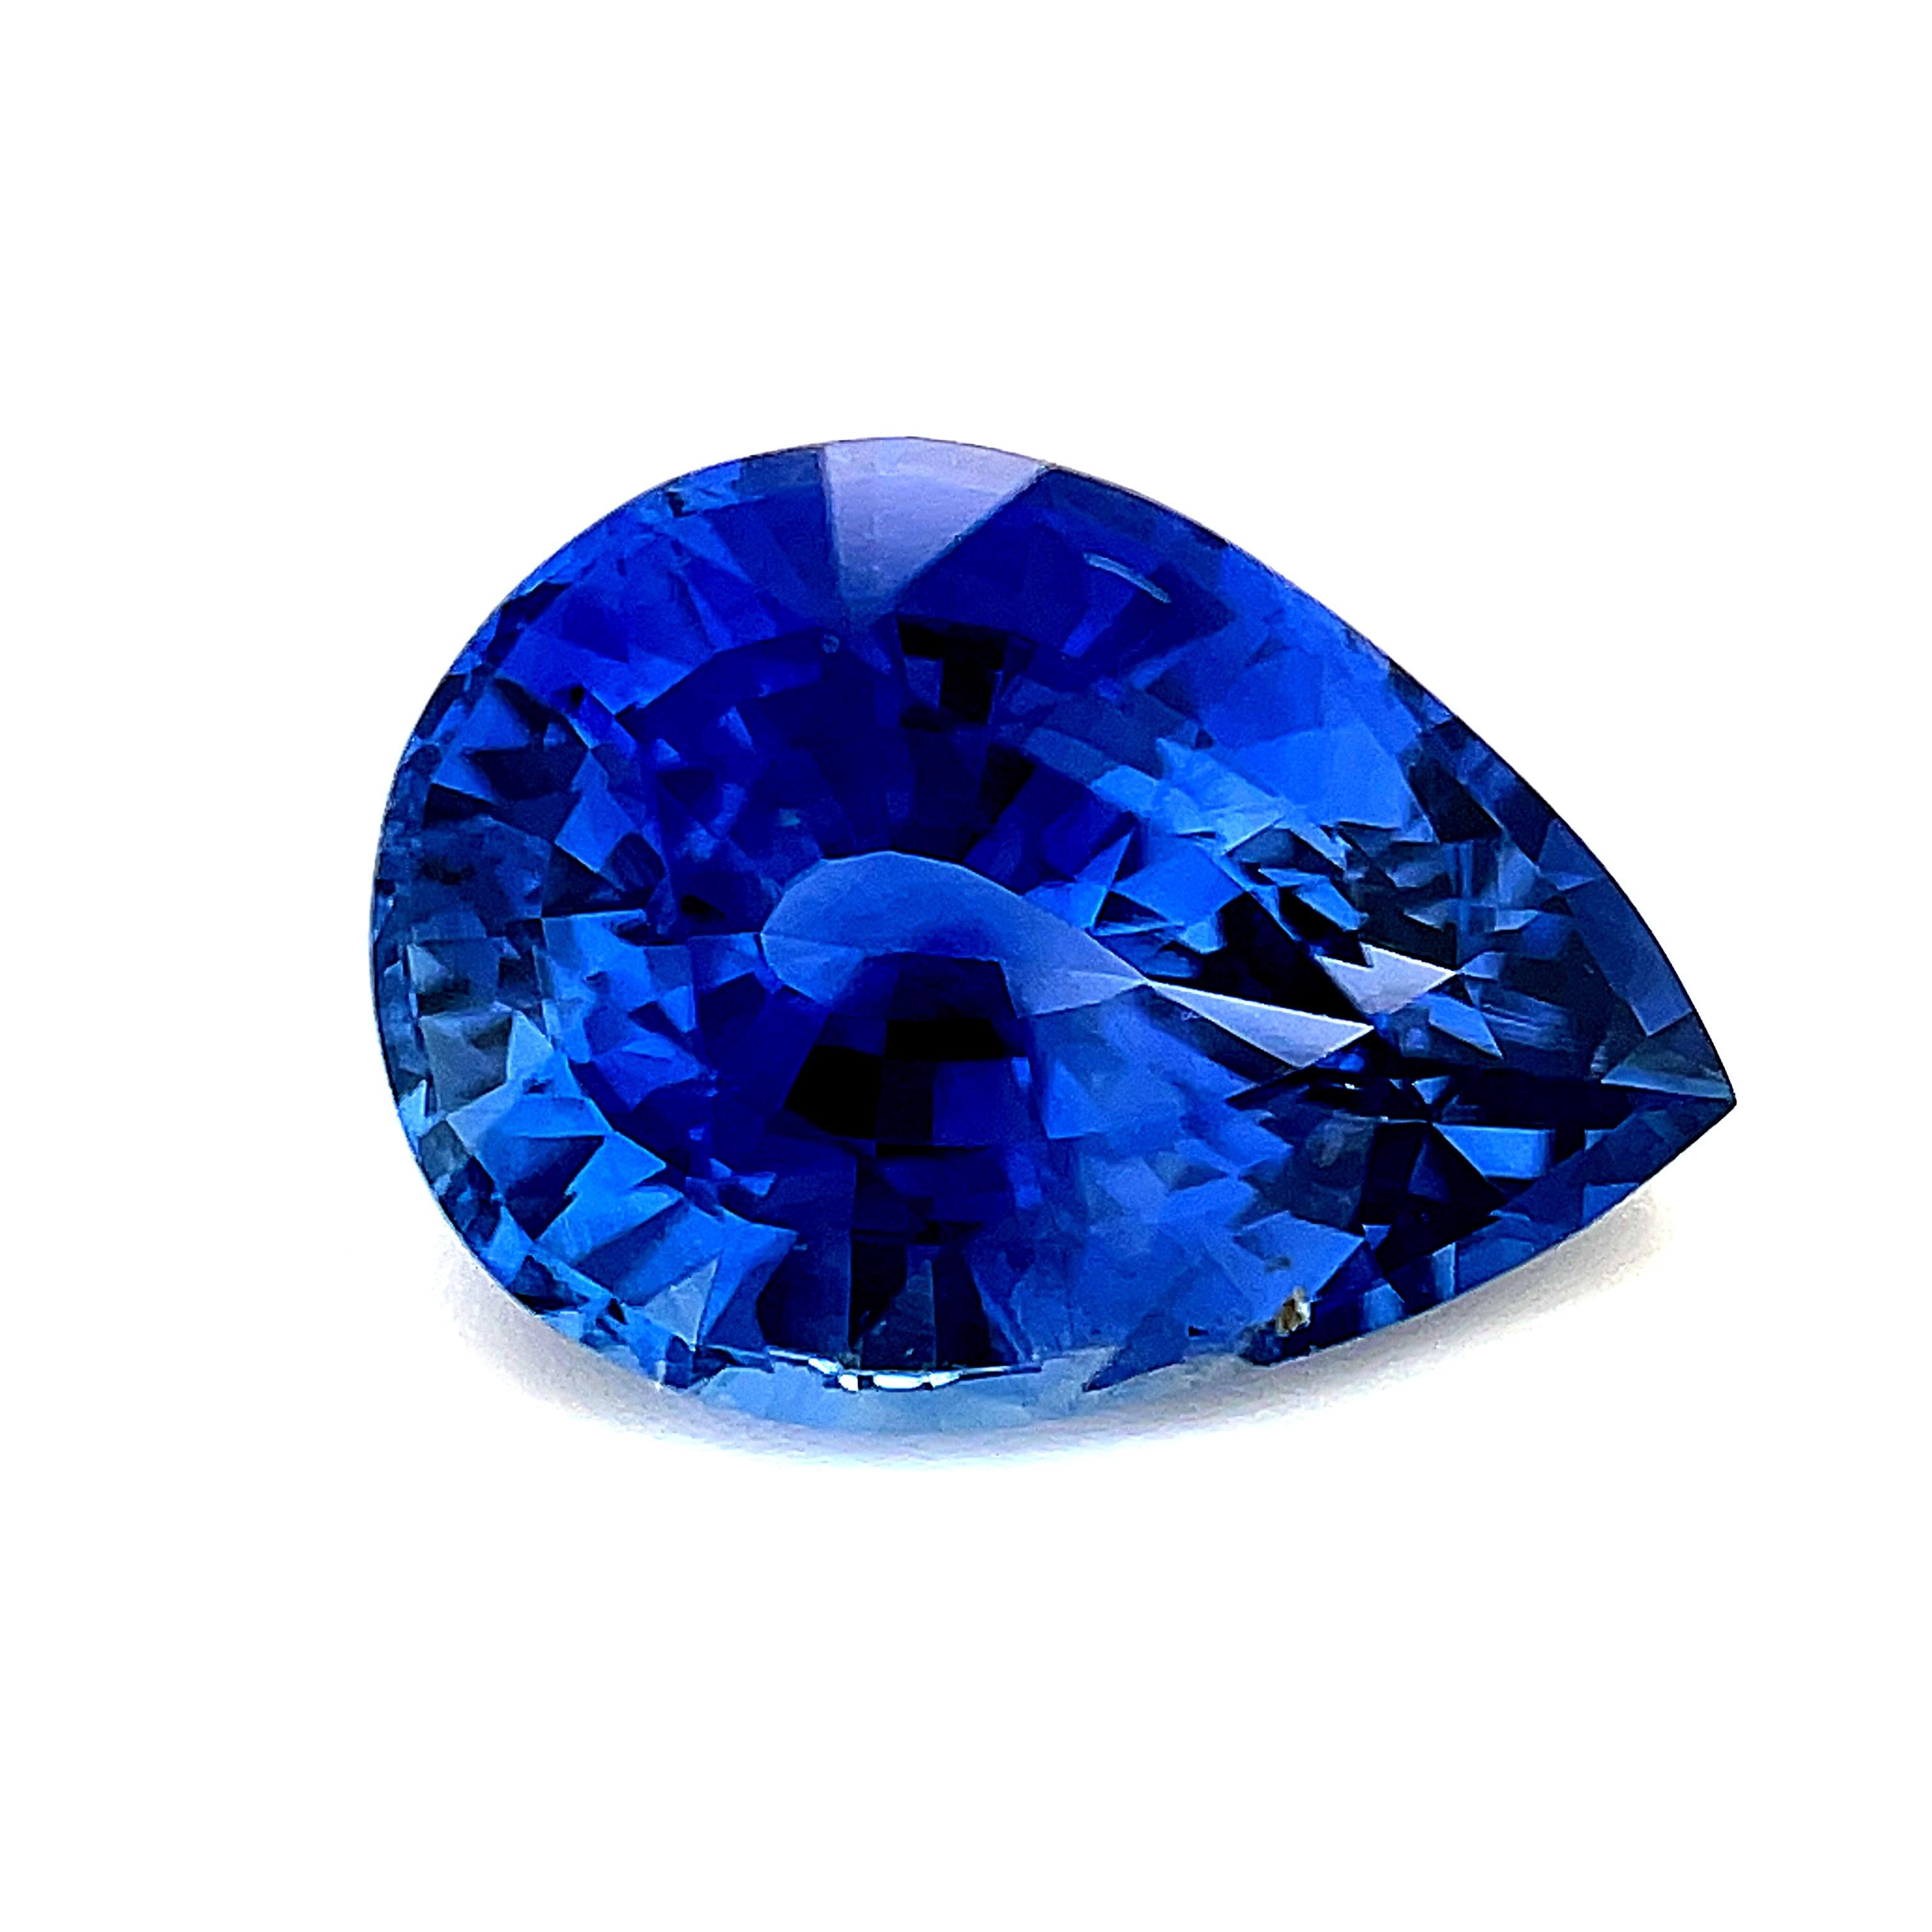 Pear Cut 4.18 Carat Unheated Natural Blue Sapphire Pear, Loose Gemstone, GIA Certified For Sale